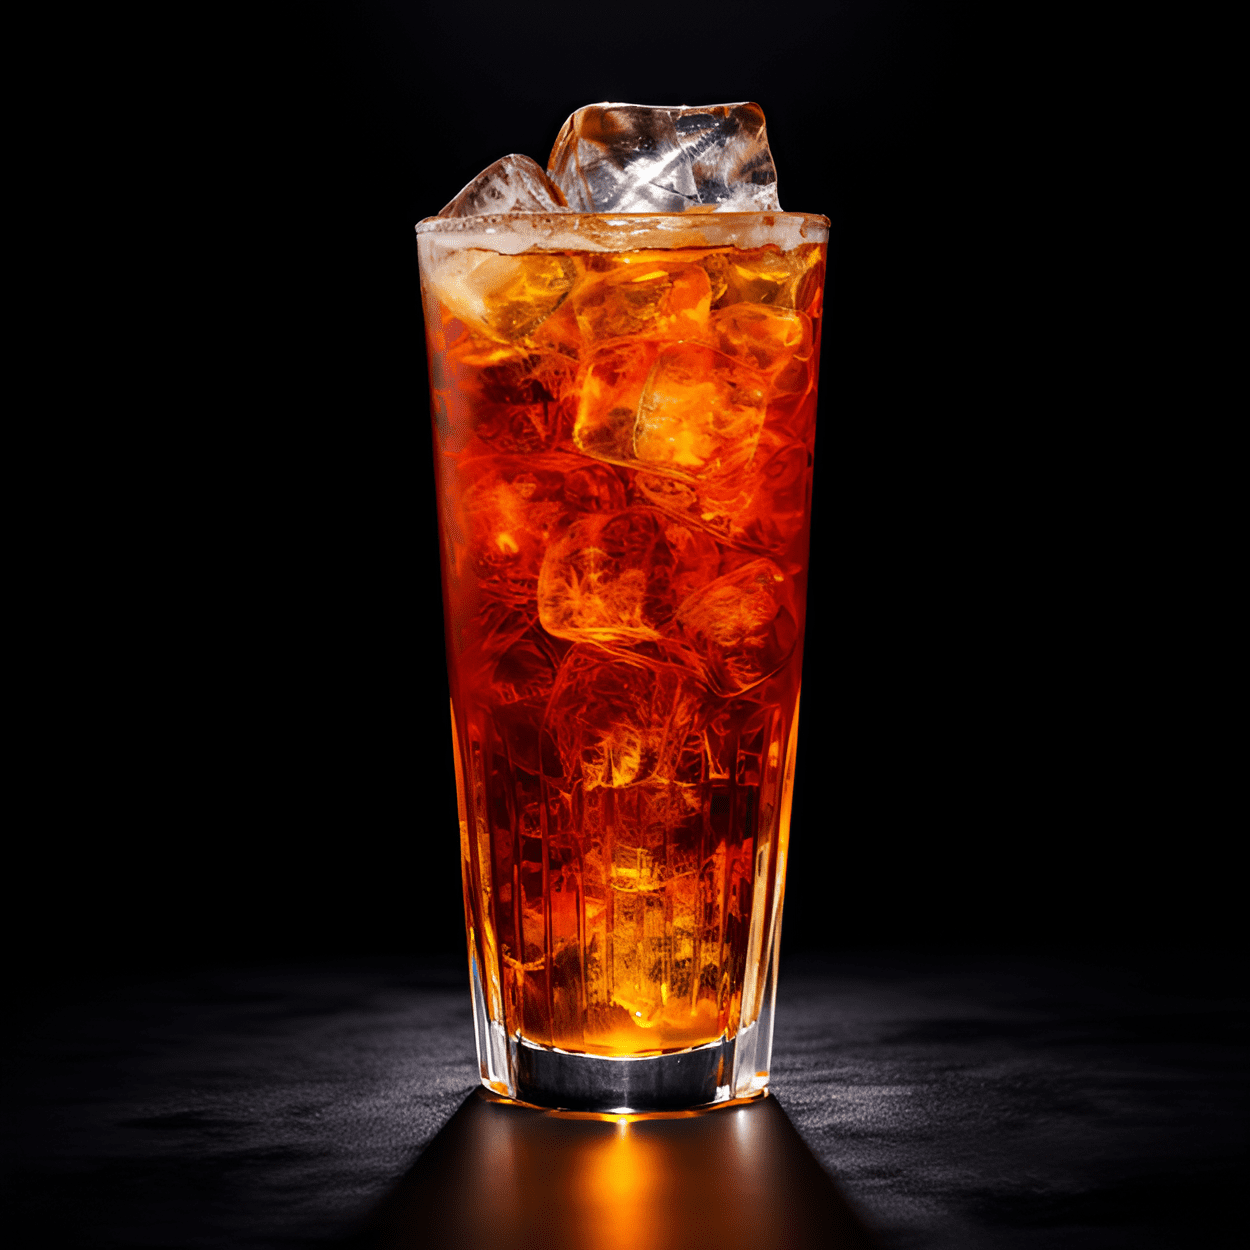 The Vodka Red Bull has a sweet, fruity taste with a strong, energizing kick from the caffeine. The vodka adds a smooth, clear, and crisp flavor that balances the sweetness of the Red Bull.